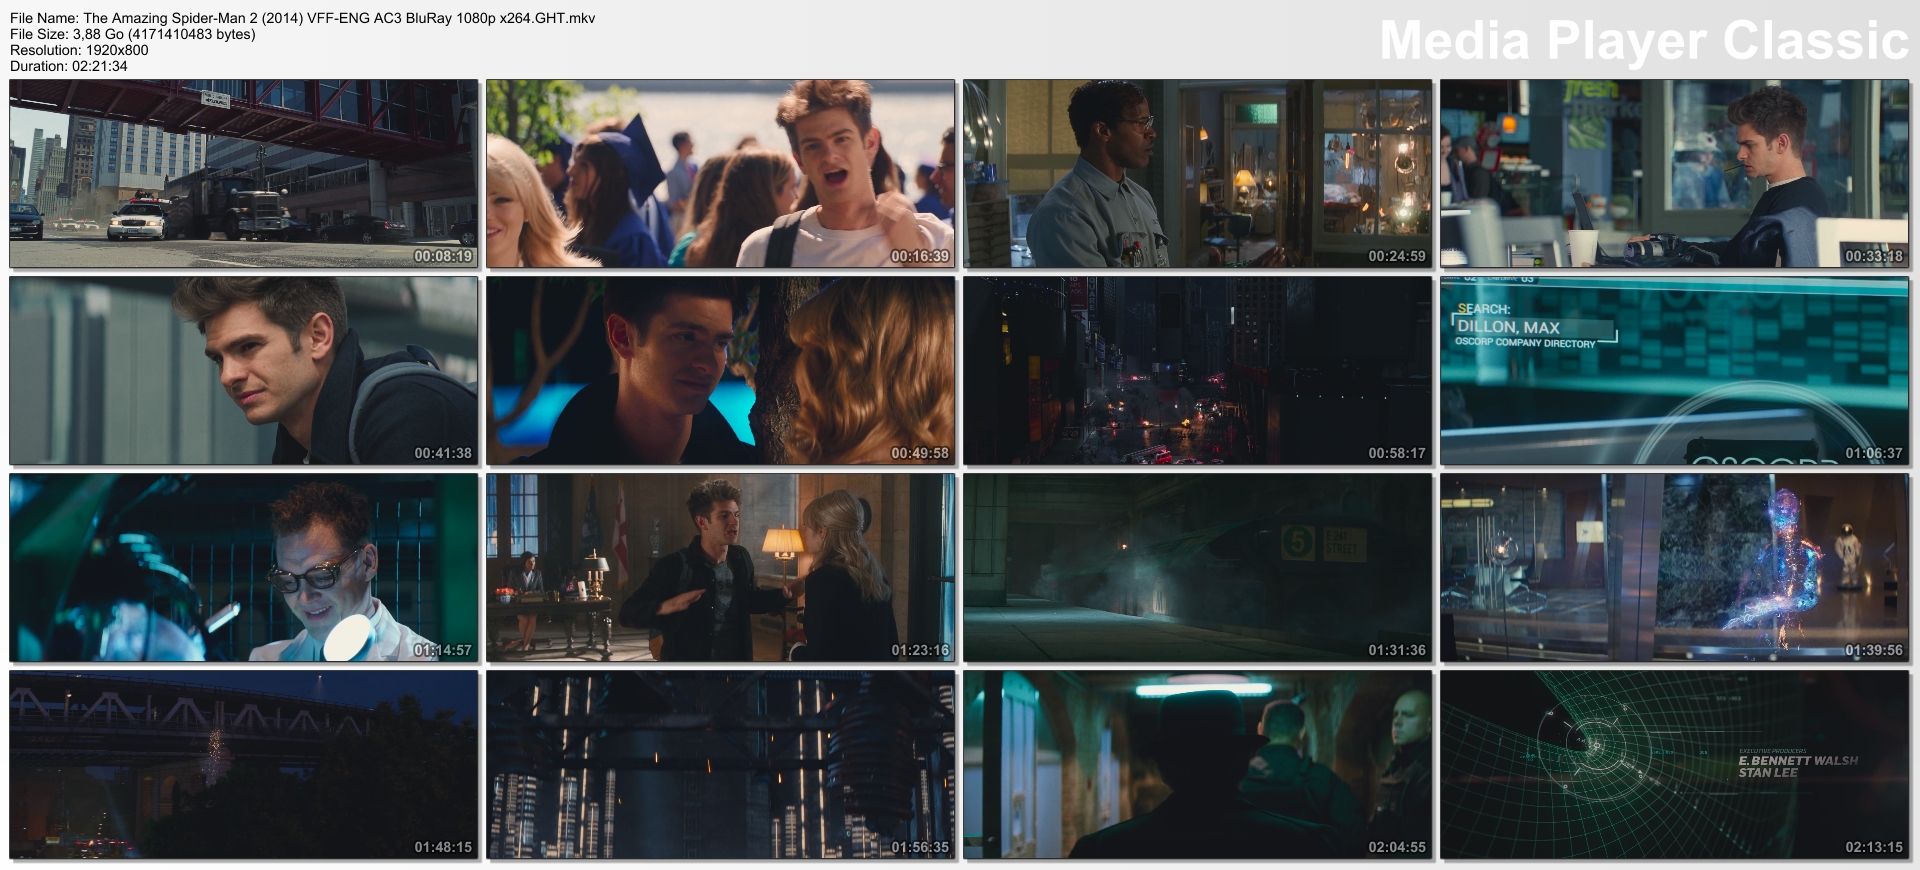 The Amazing Spider-Man 2 (2014) VFF-ENG AC3 BluRay 1080p x264